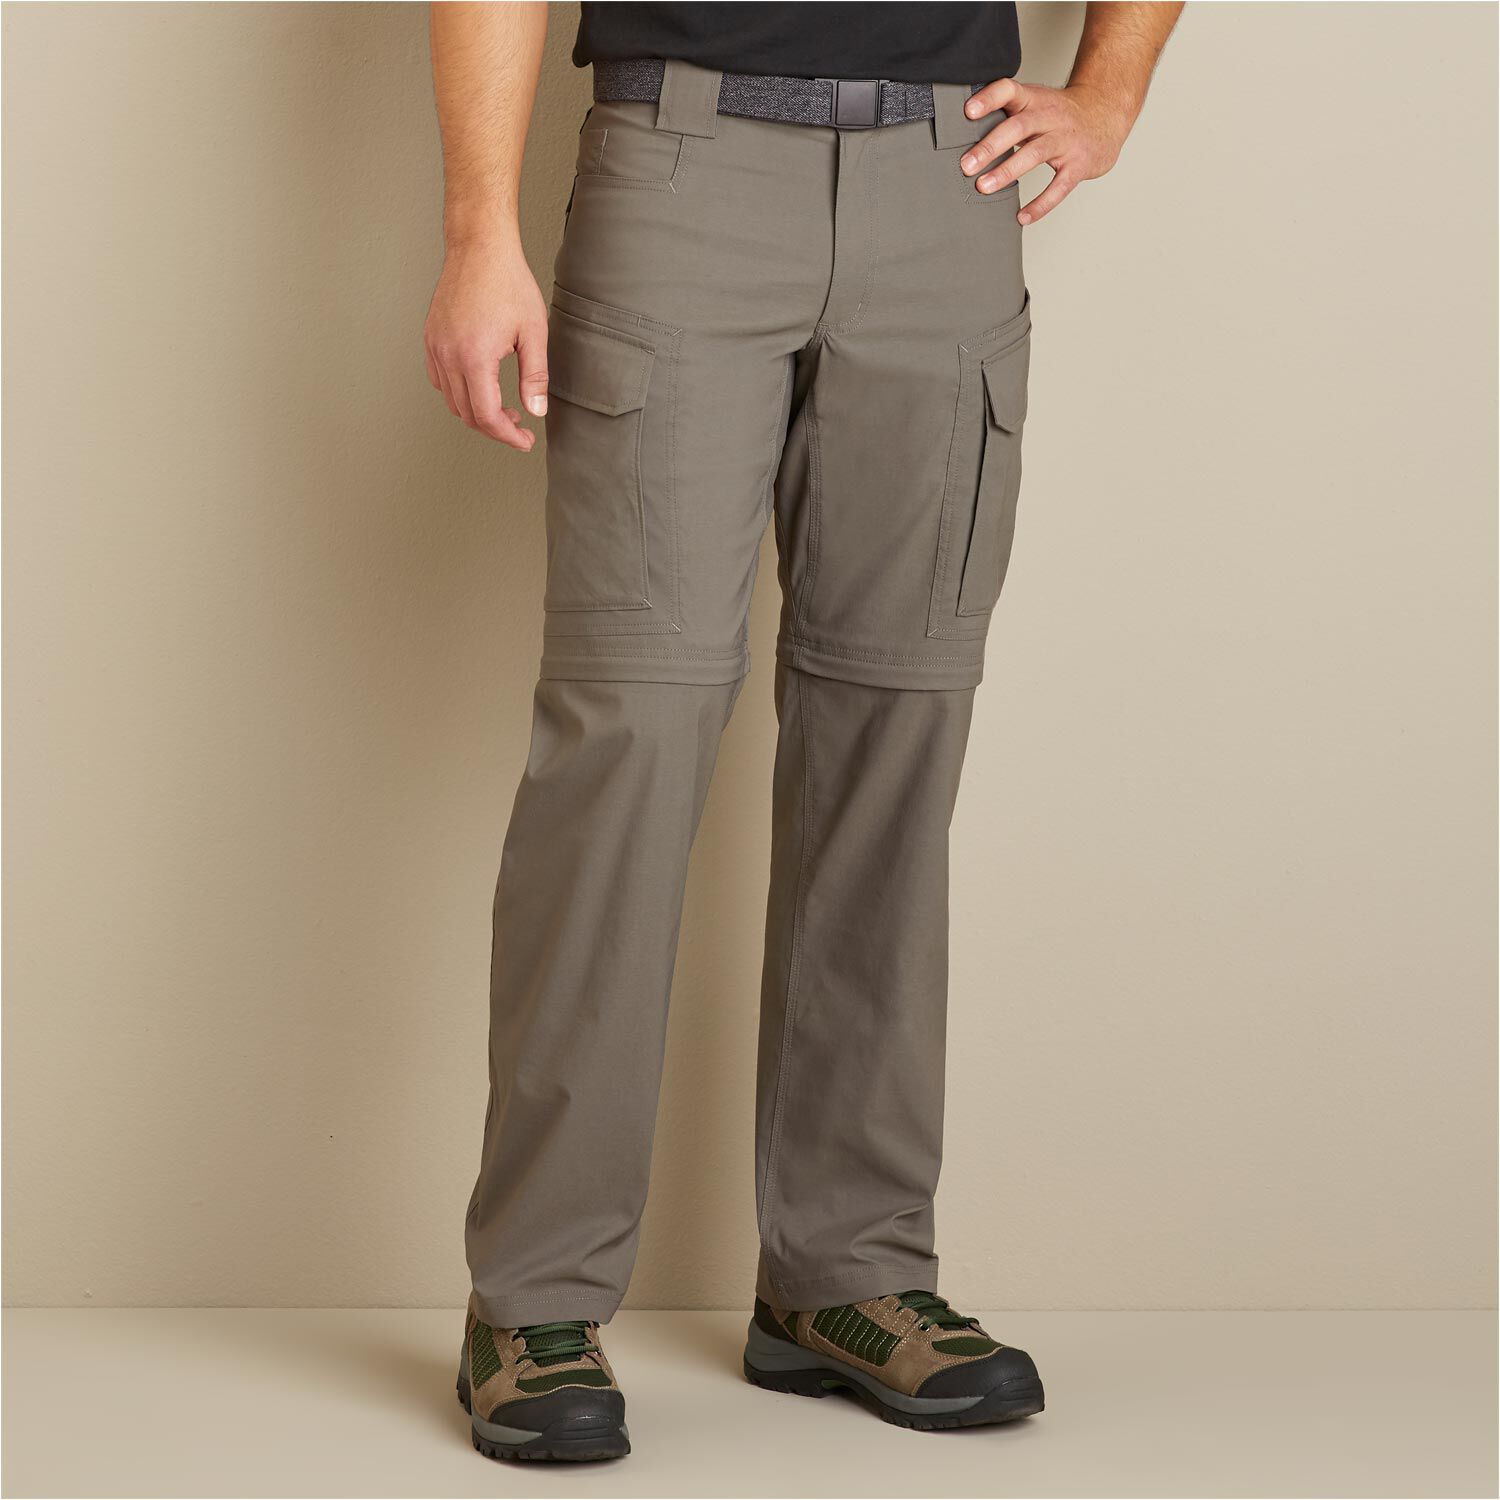 Men's DuluthFlex Dry on the Fly Convertible Relaxed Fit Cargo